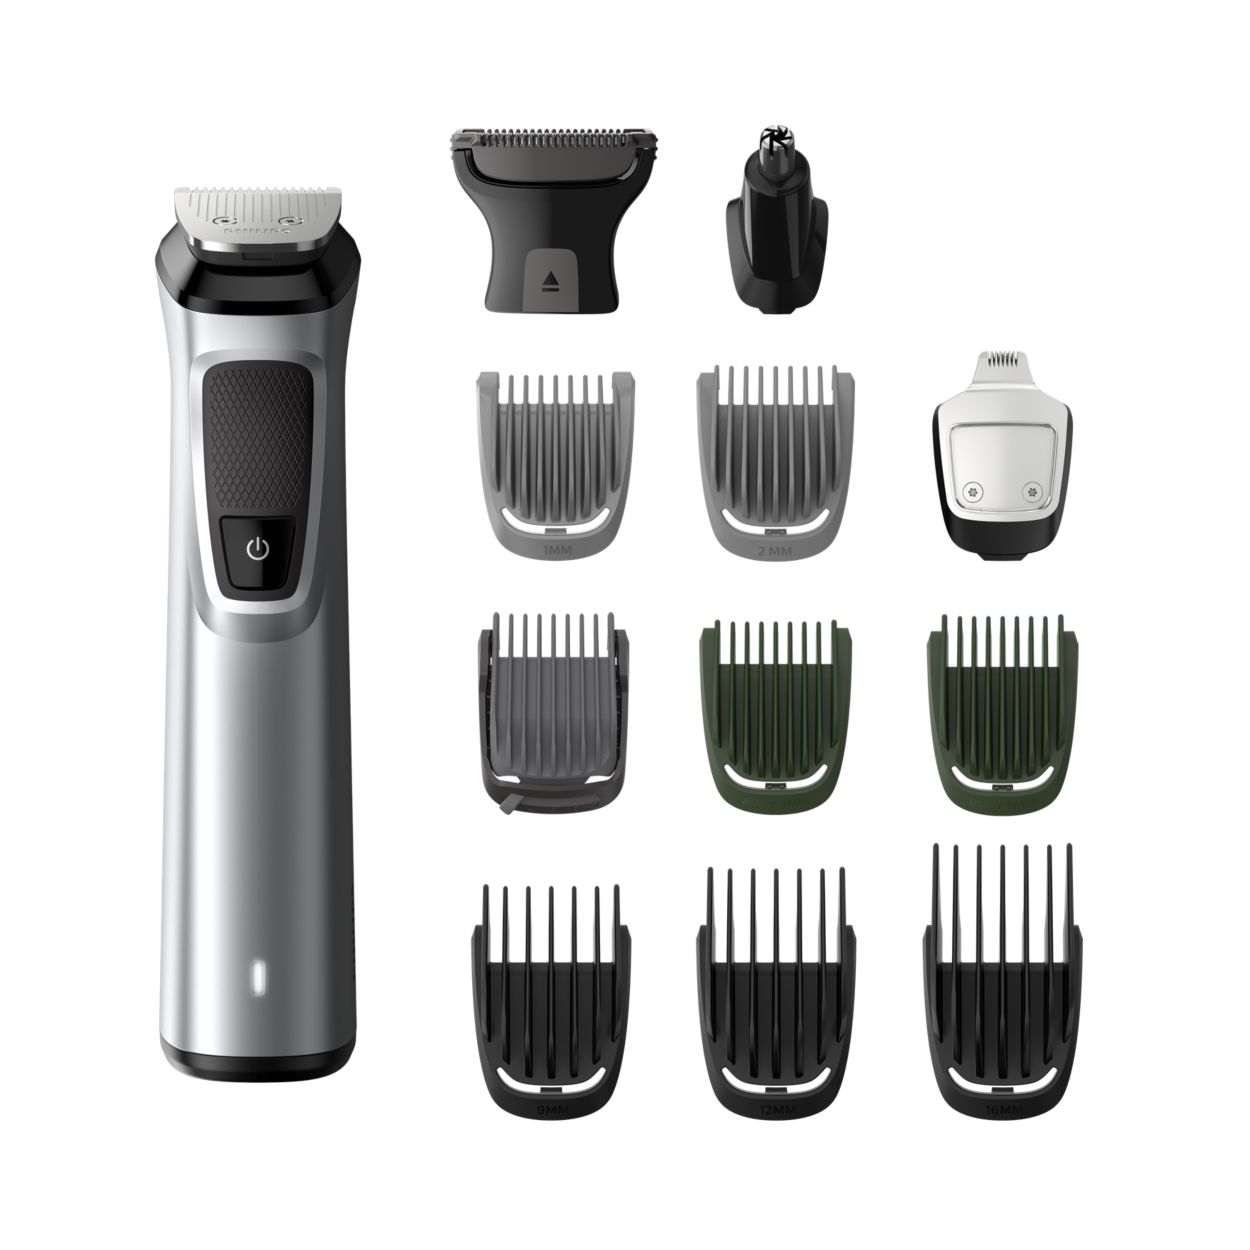 Philips Series 7000: The Ultimate Grooming Solution?